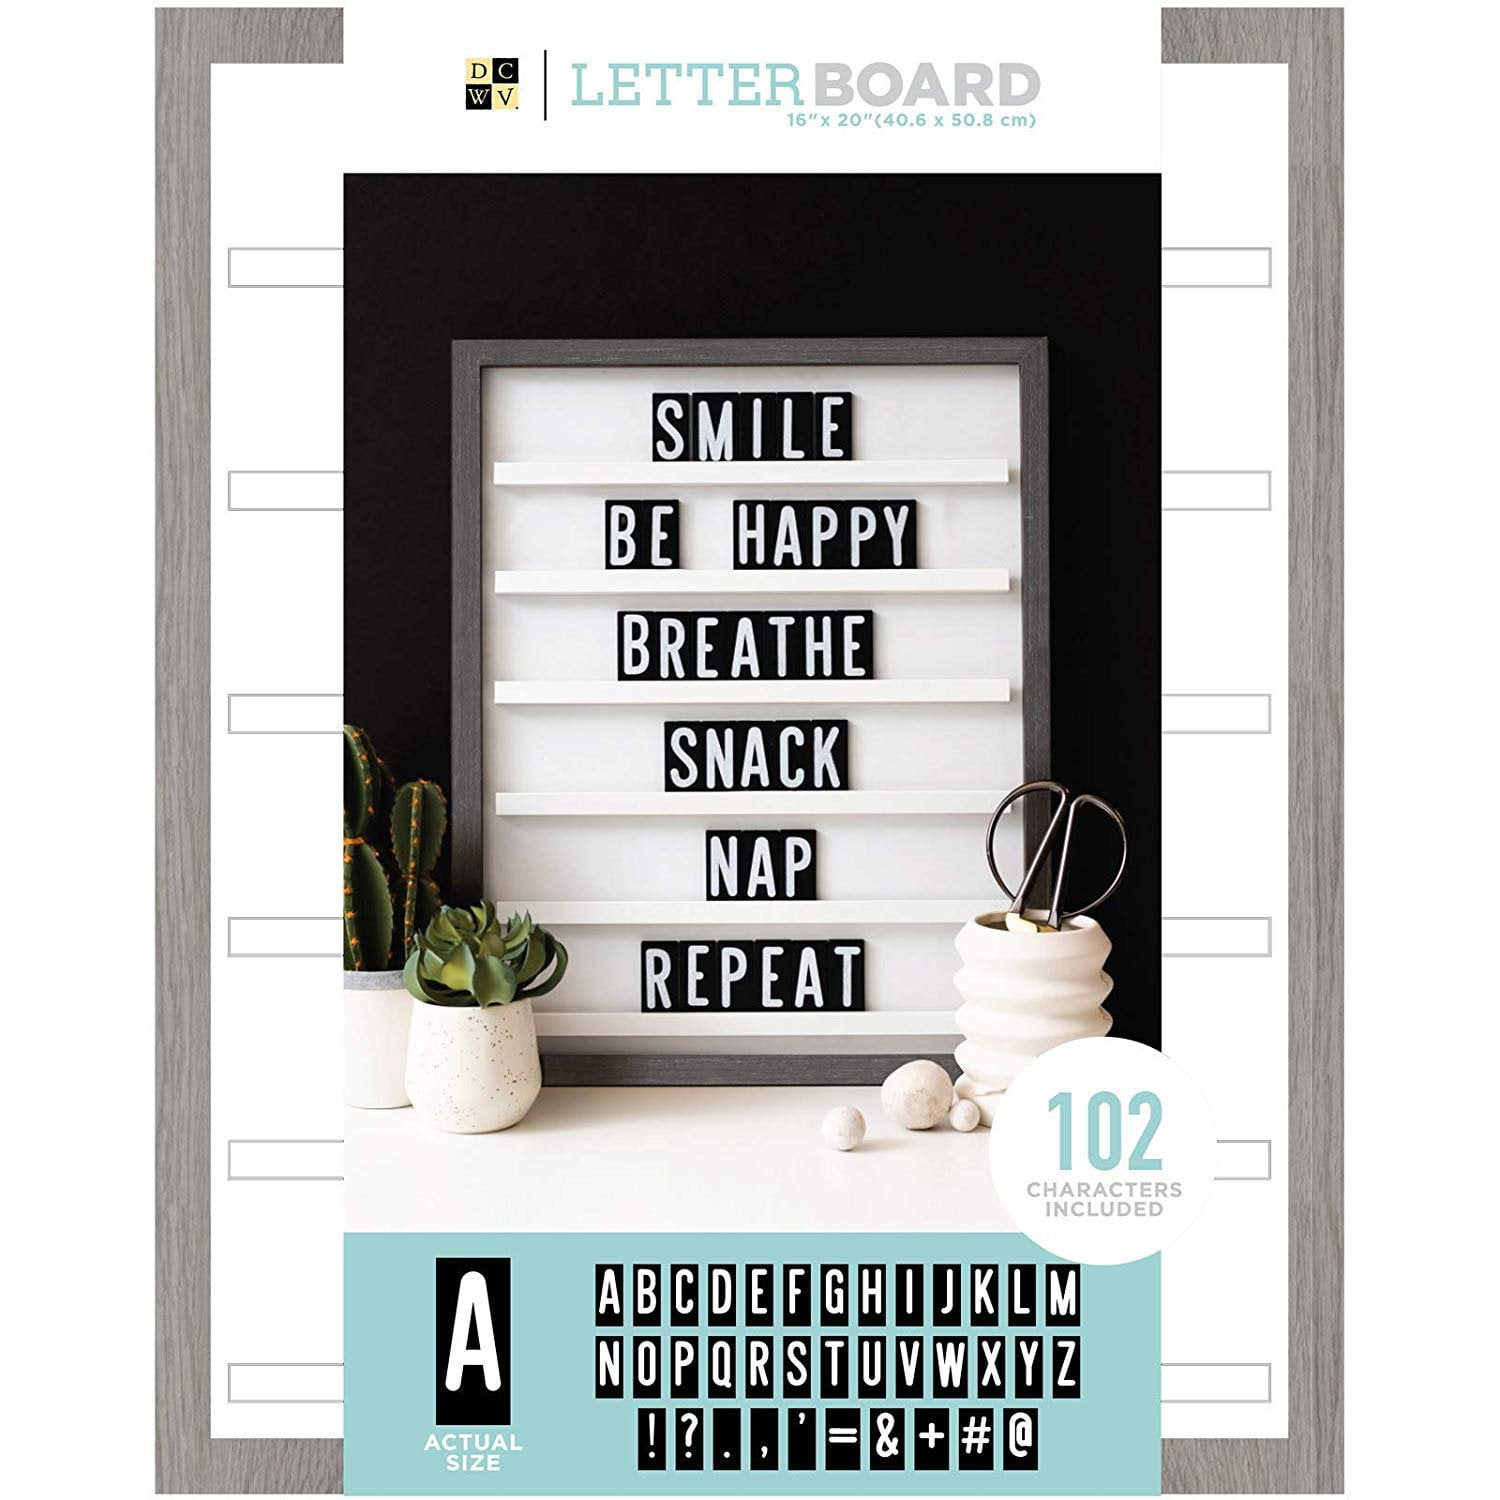 ShiningDay 10x10 Inches Oak Frame Changeable Felt Letter Board Include 290 Letters with Mounting Hook Numbers & Symbols Grit Board and Canvas Bag Letter Board